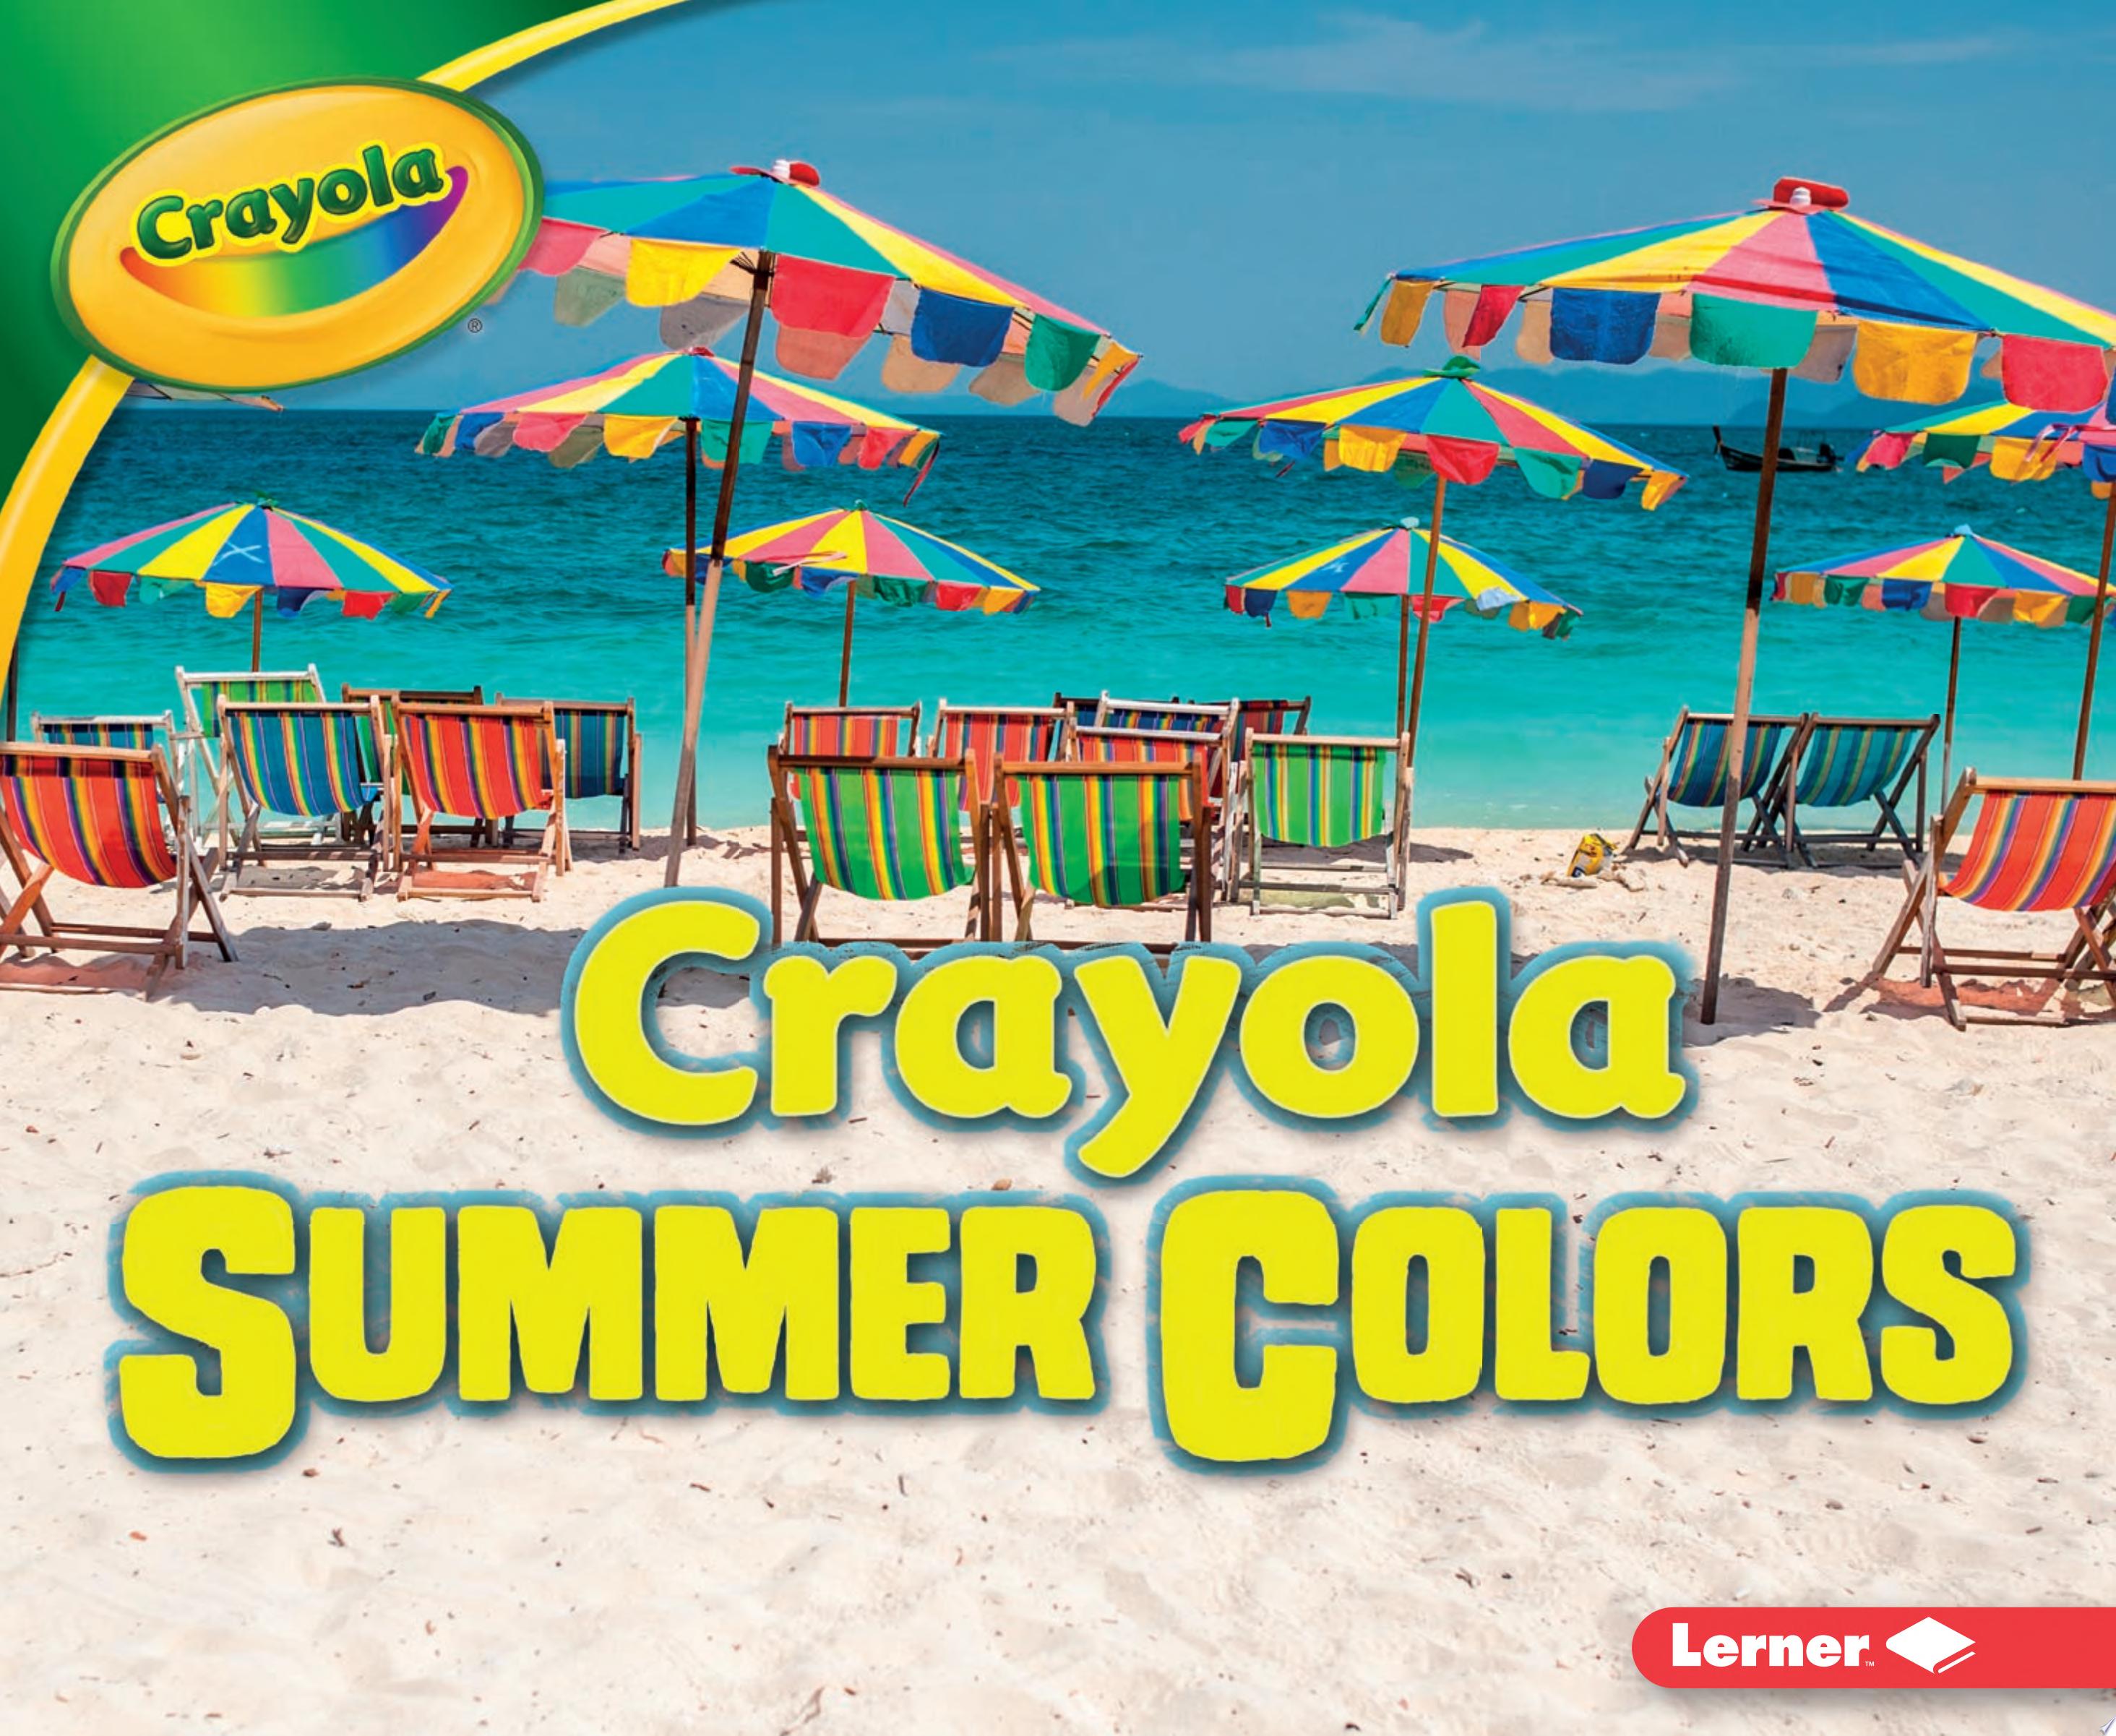 Image for "Crayola Summer Colors"